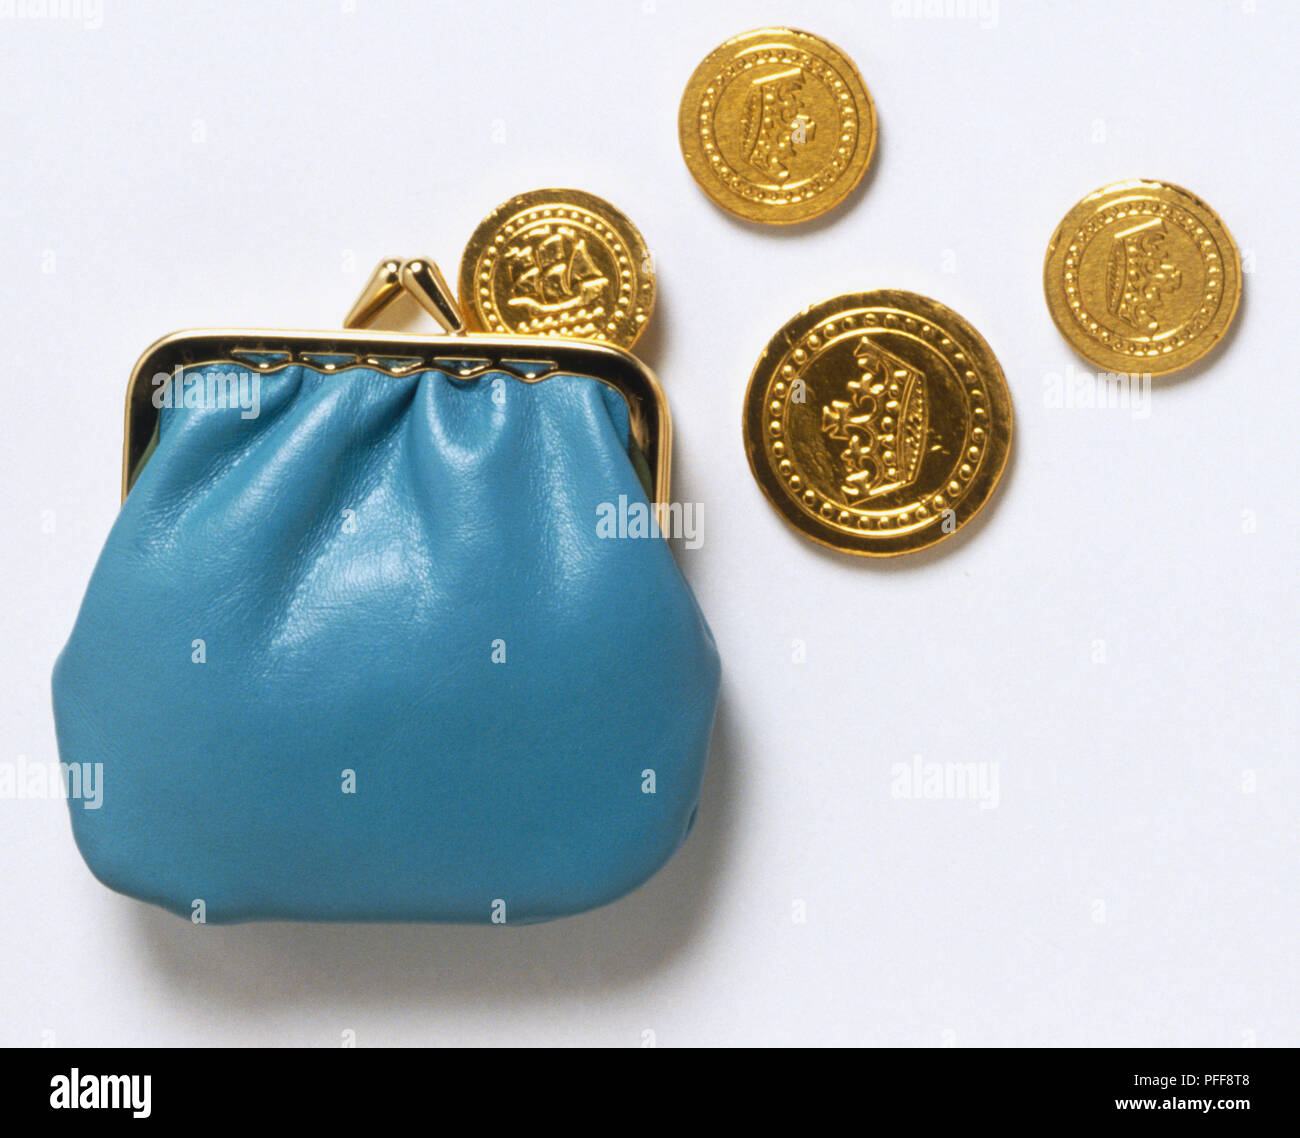 Blue clasp purse and scattered gold coin, close up. Stock Photo